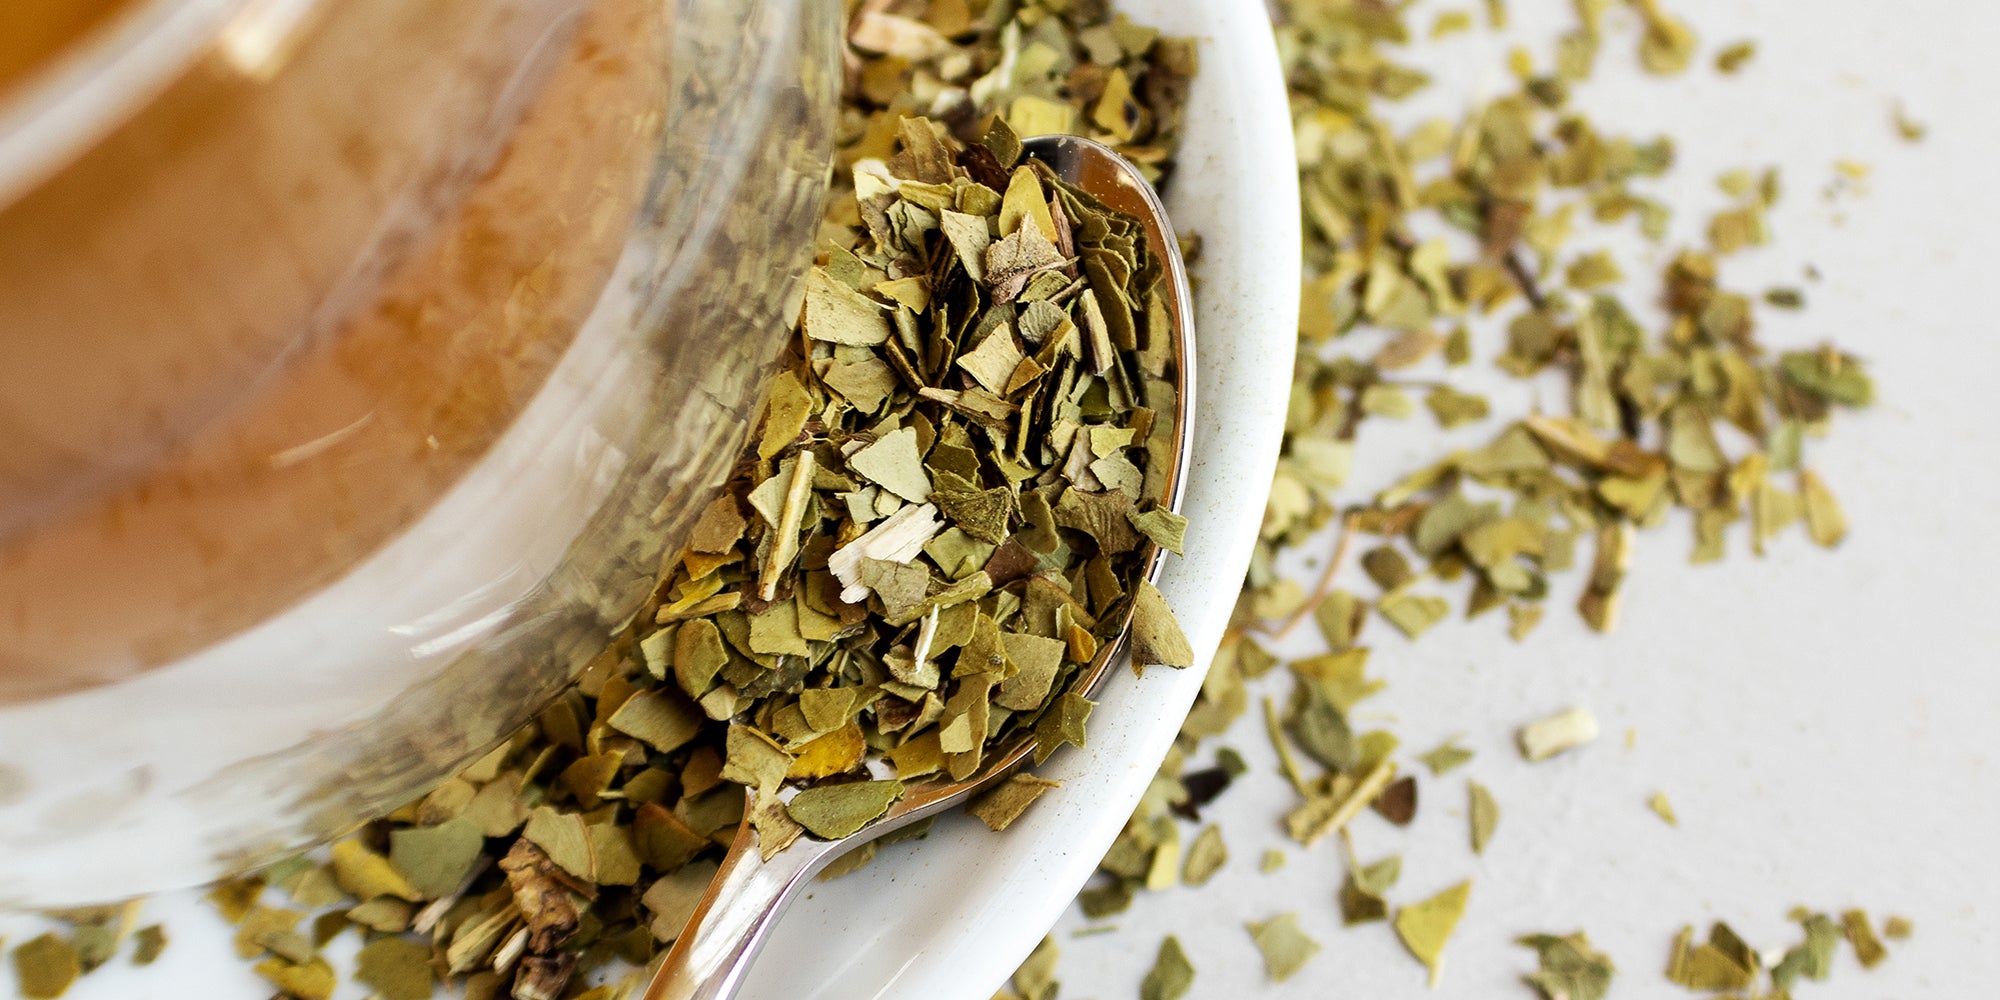 Yerba Mate - What Are The Benefits?